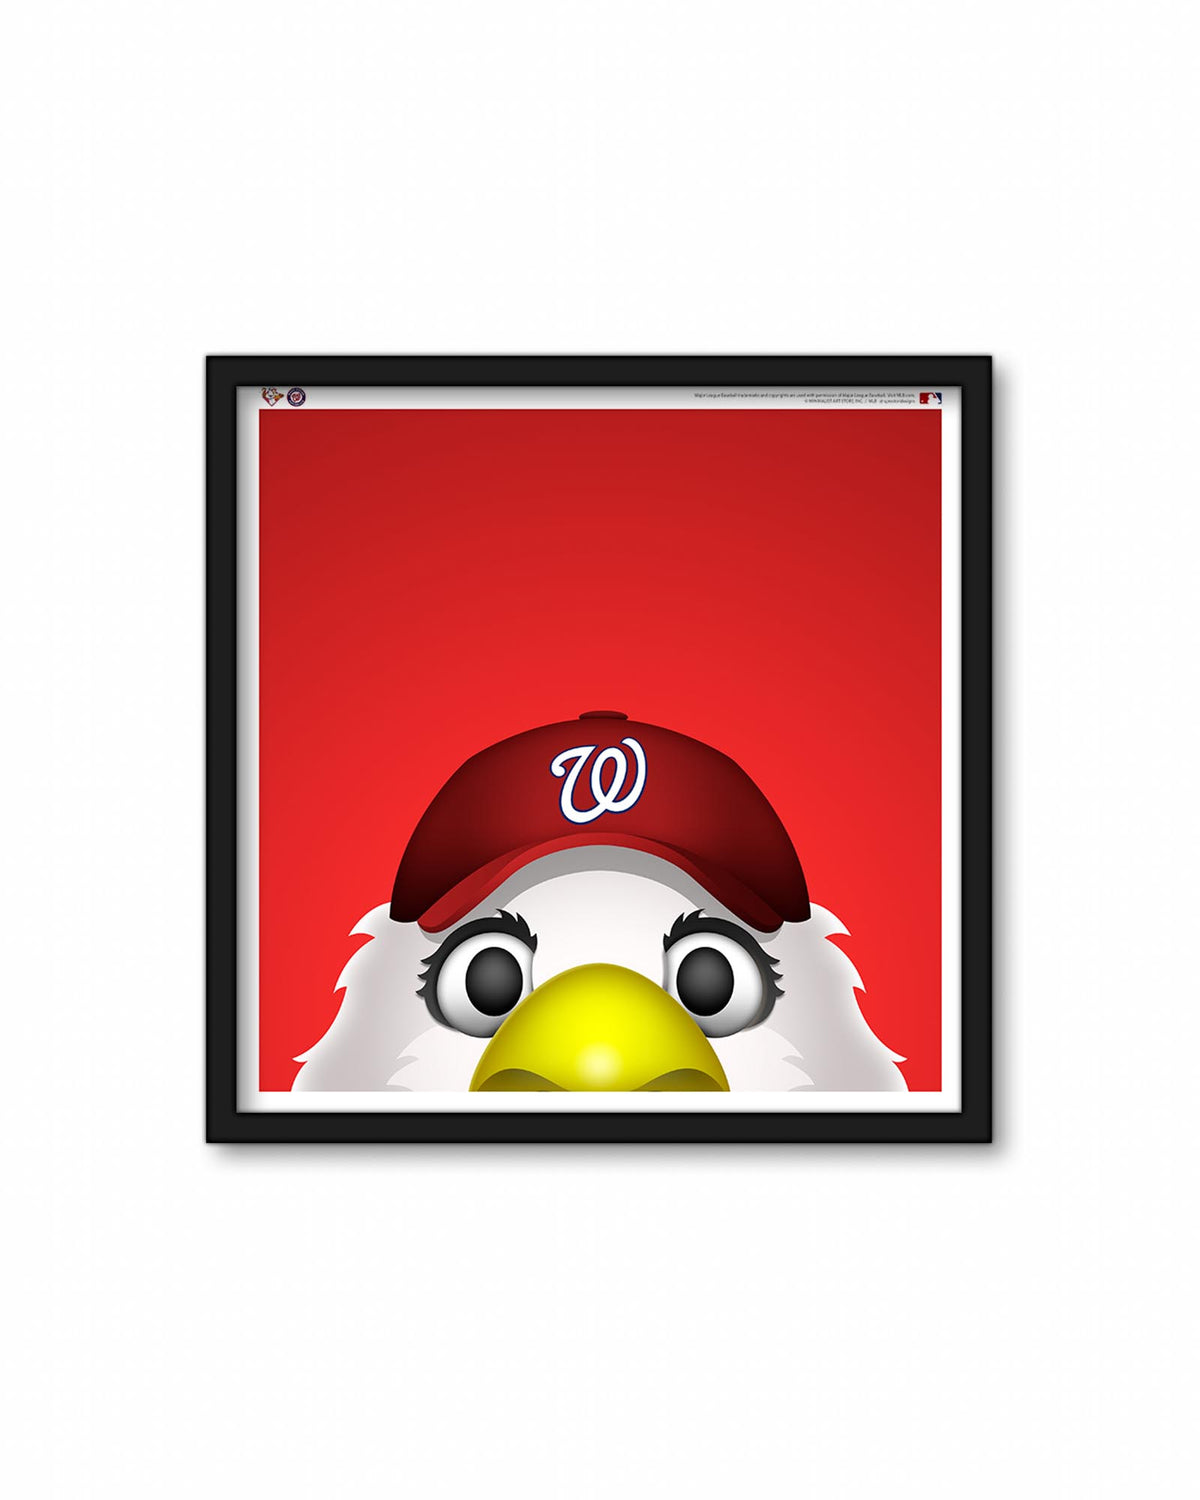 Screech is the mascot of the day! : r/Nationals